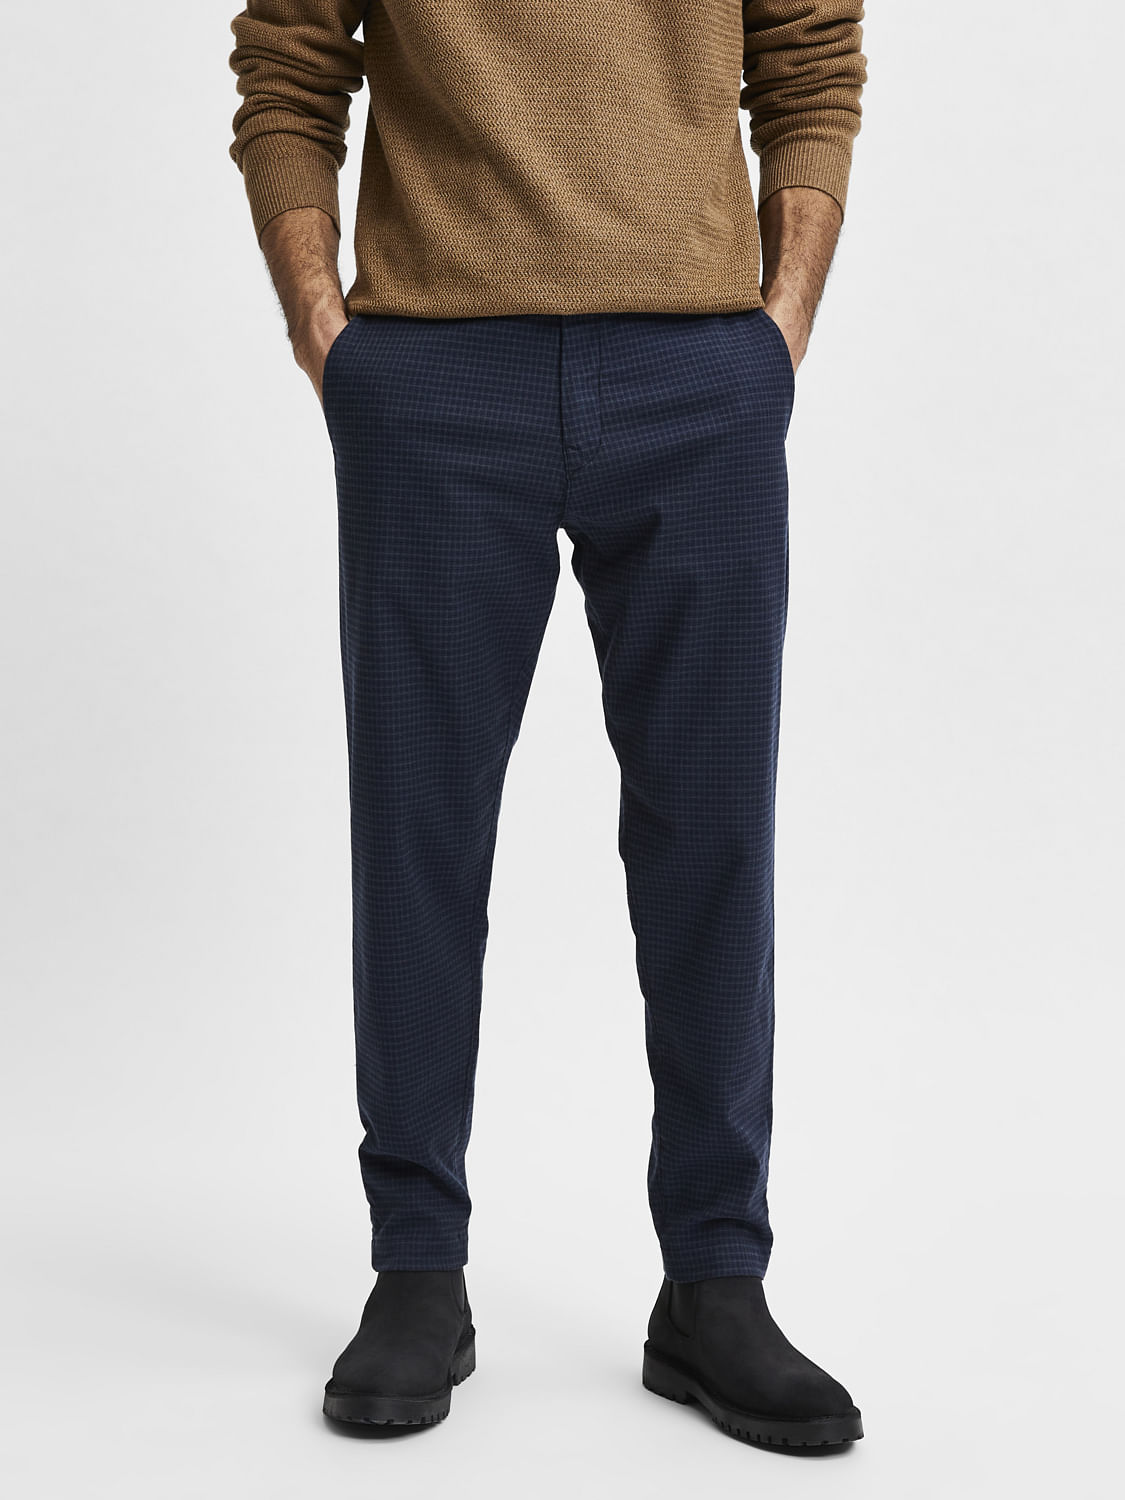 Buy Blue Chino Pants for Men at SELECTED HOMME 194862204